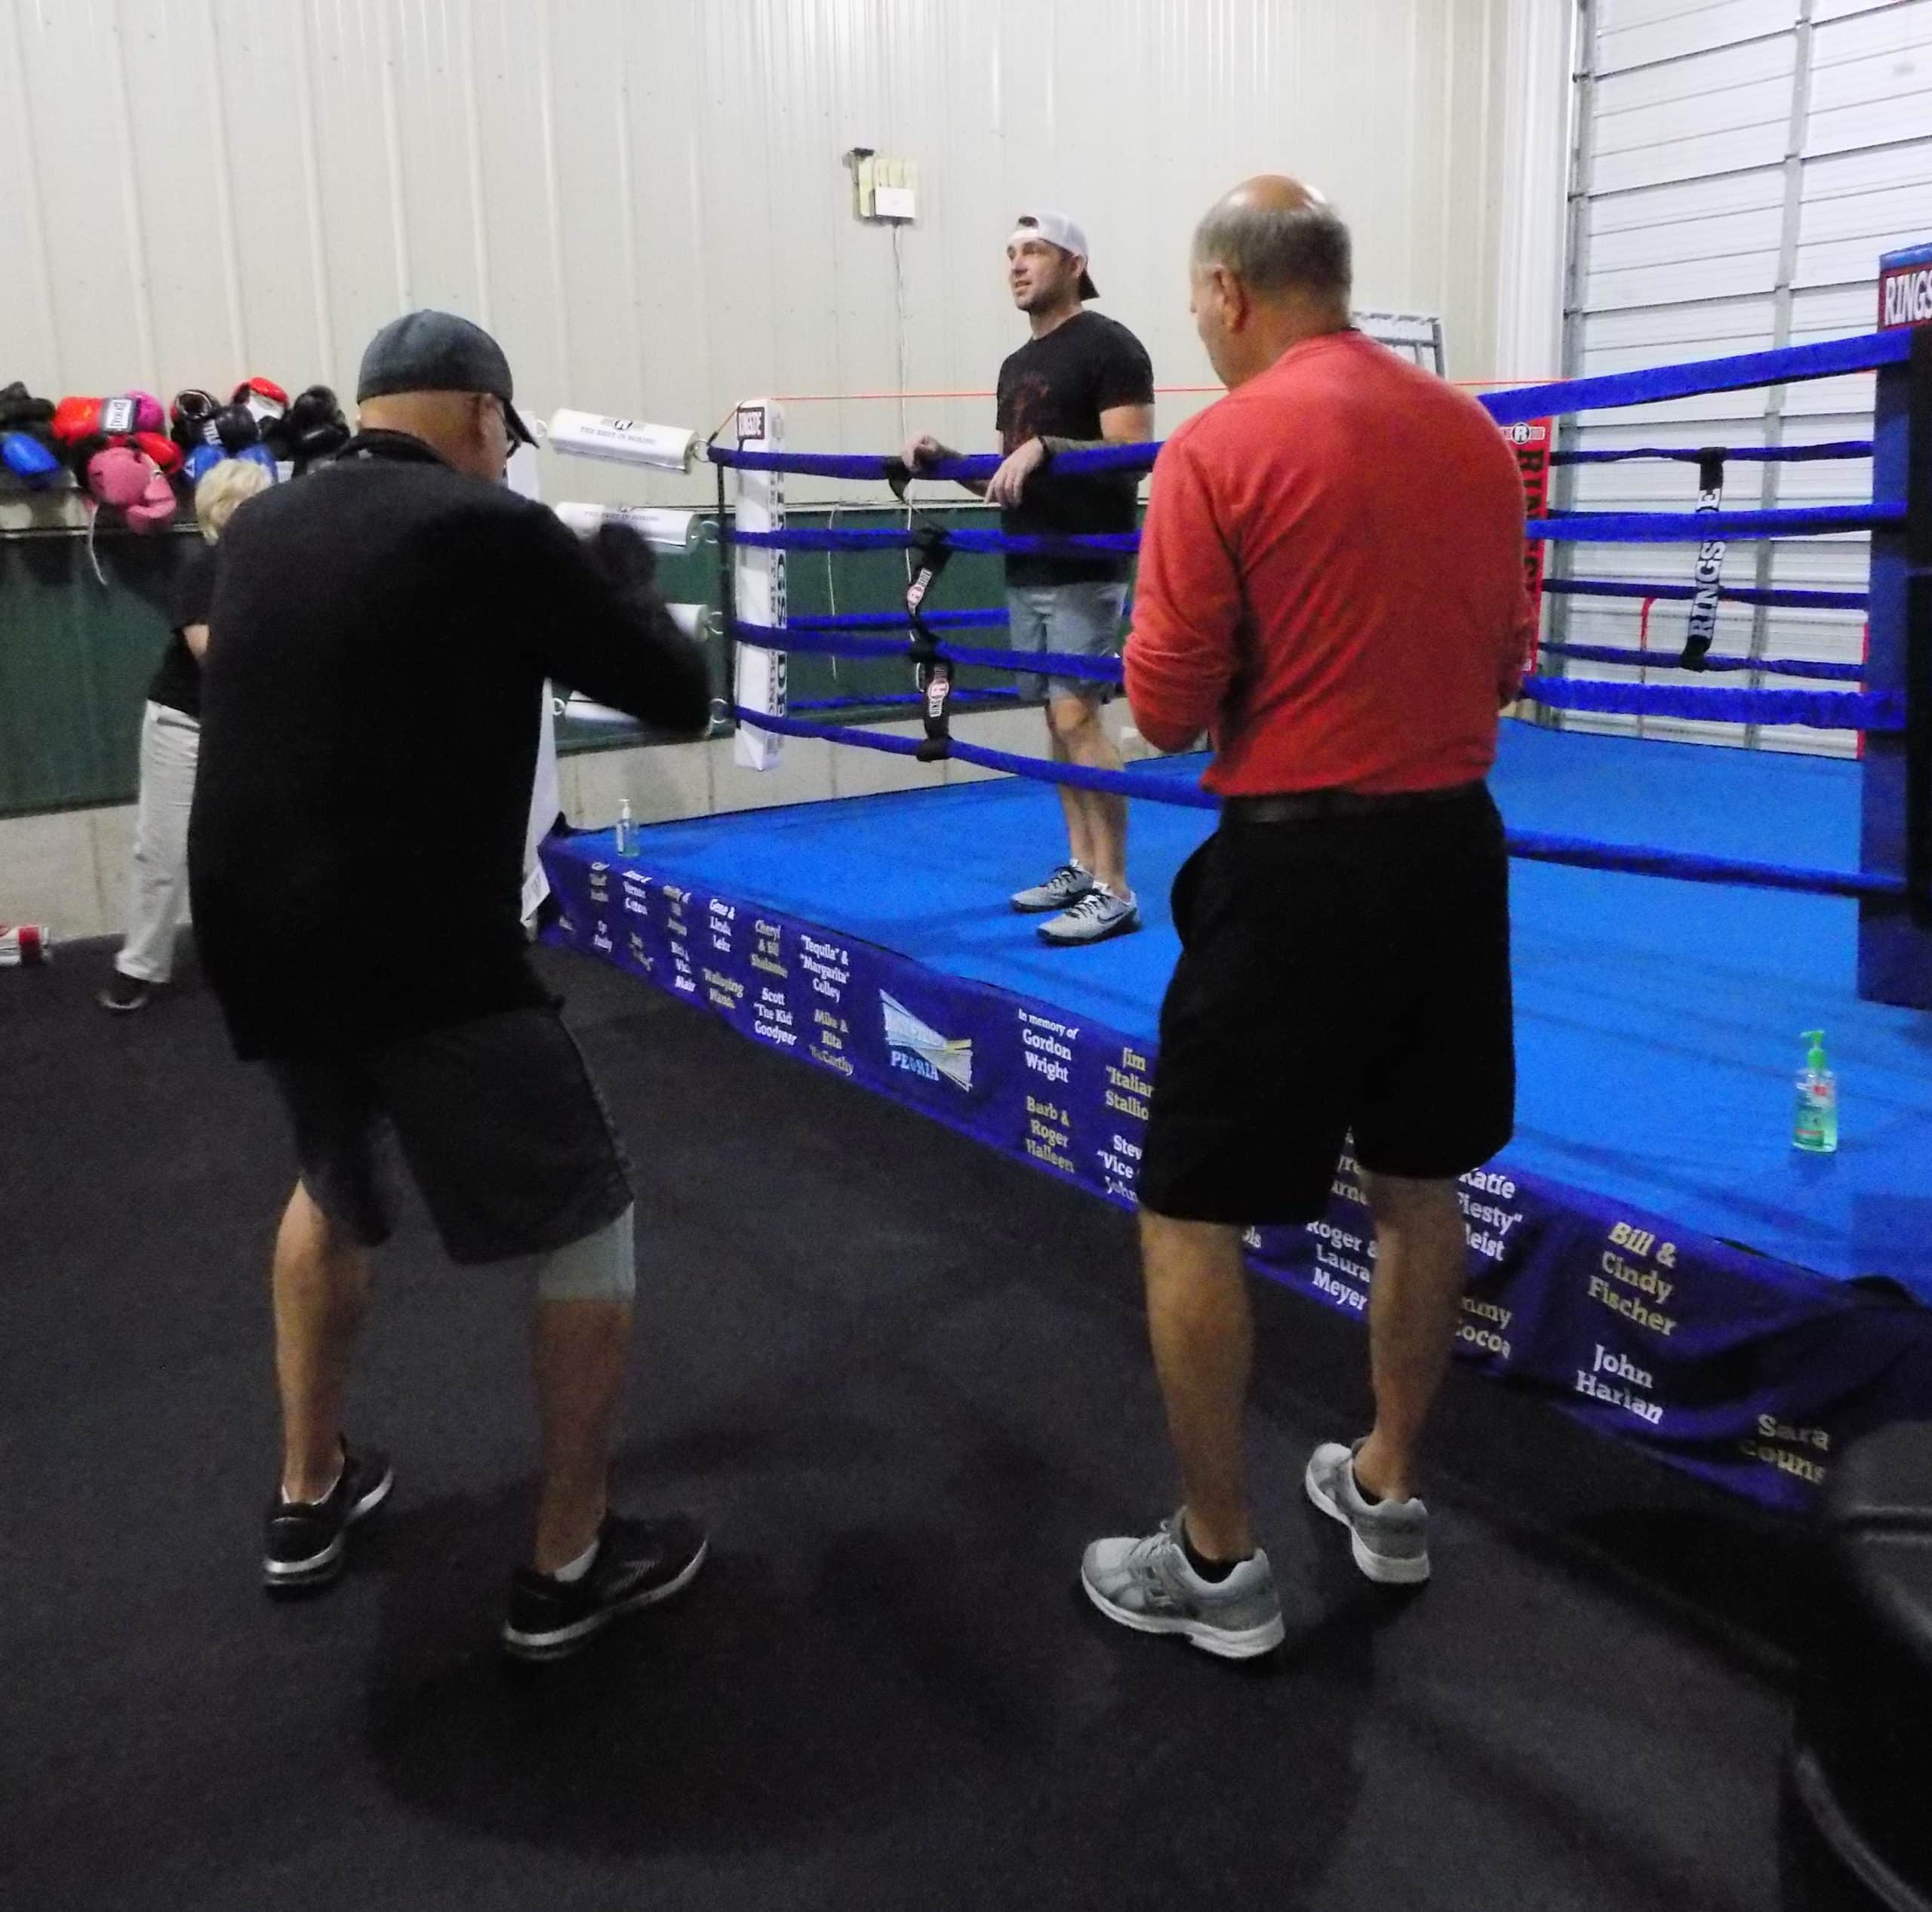 Boxing training club uses therapy to steady Parkinsons patients ...